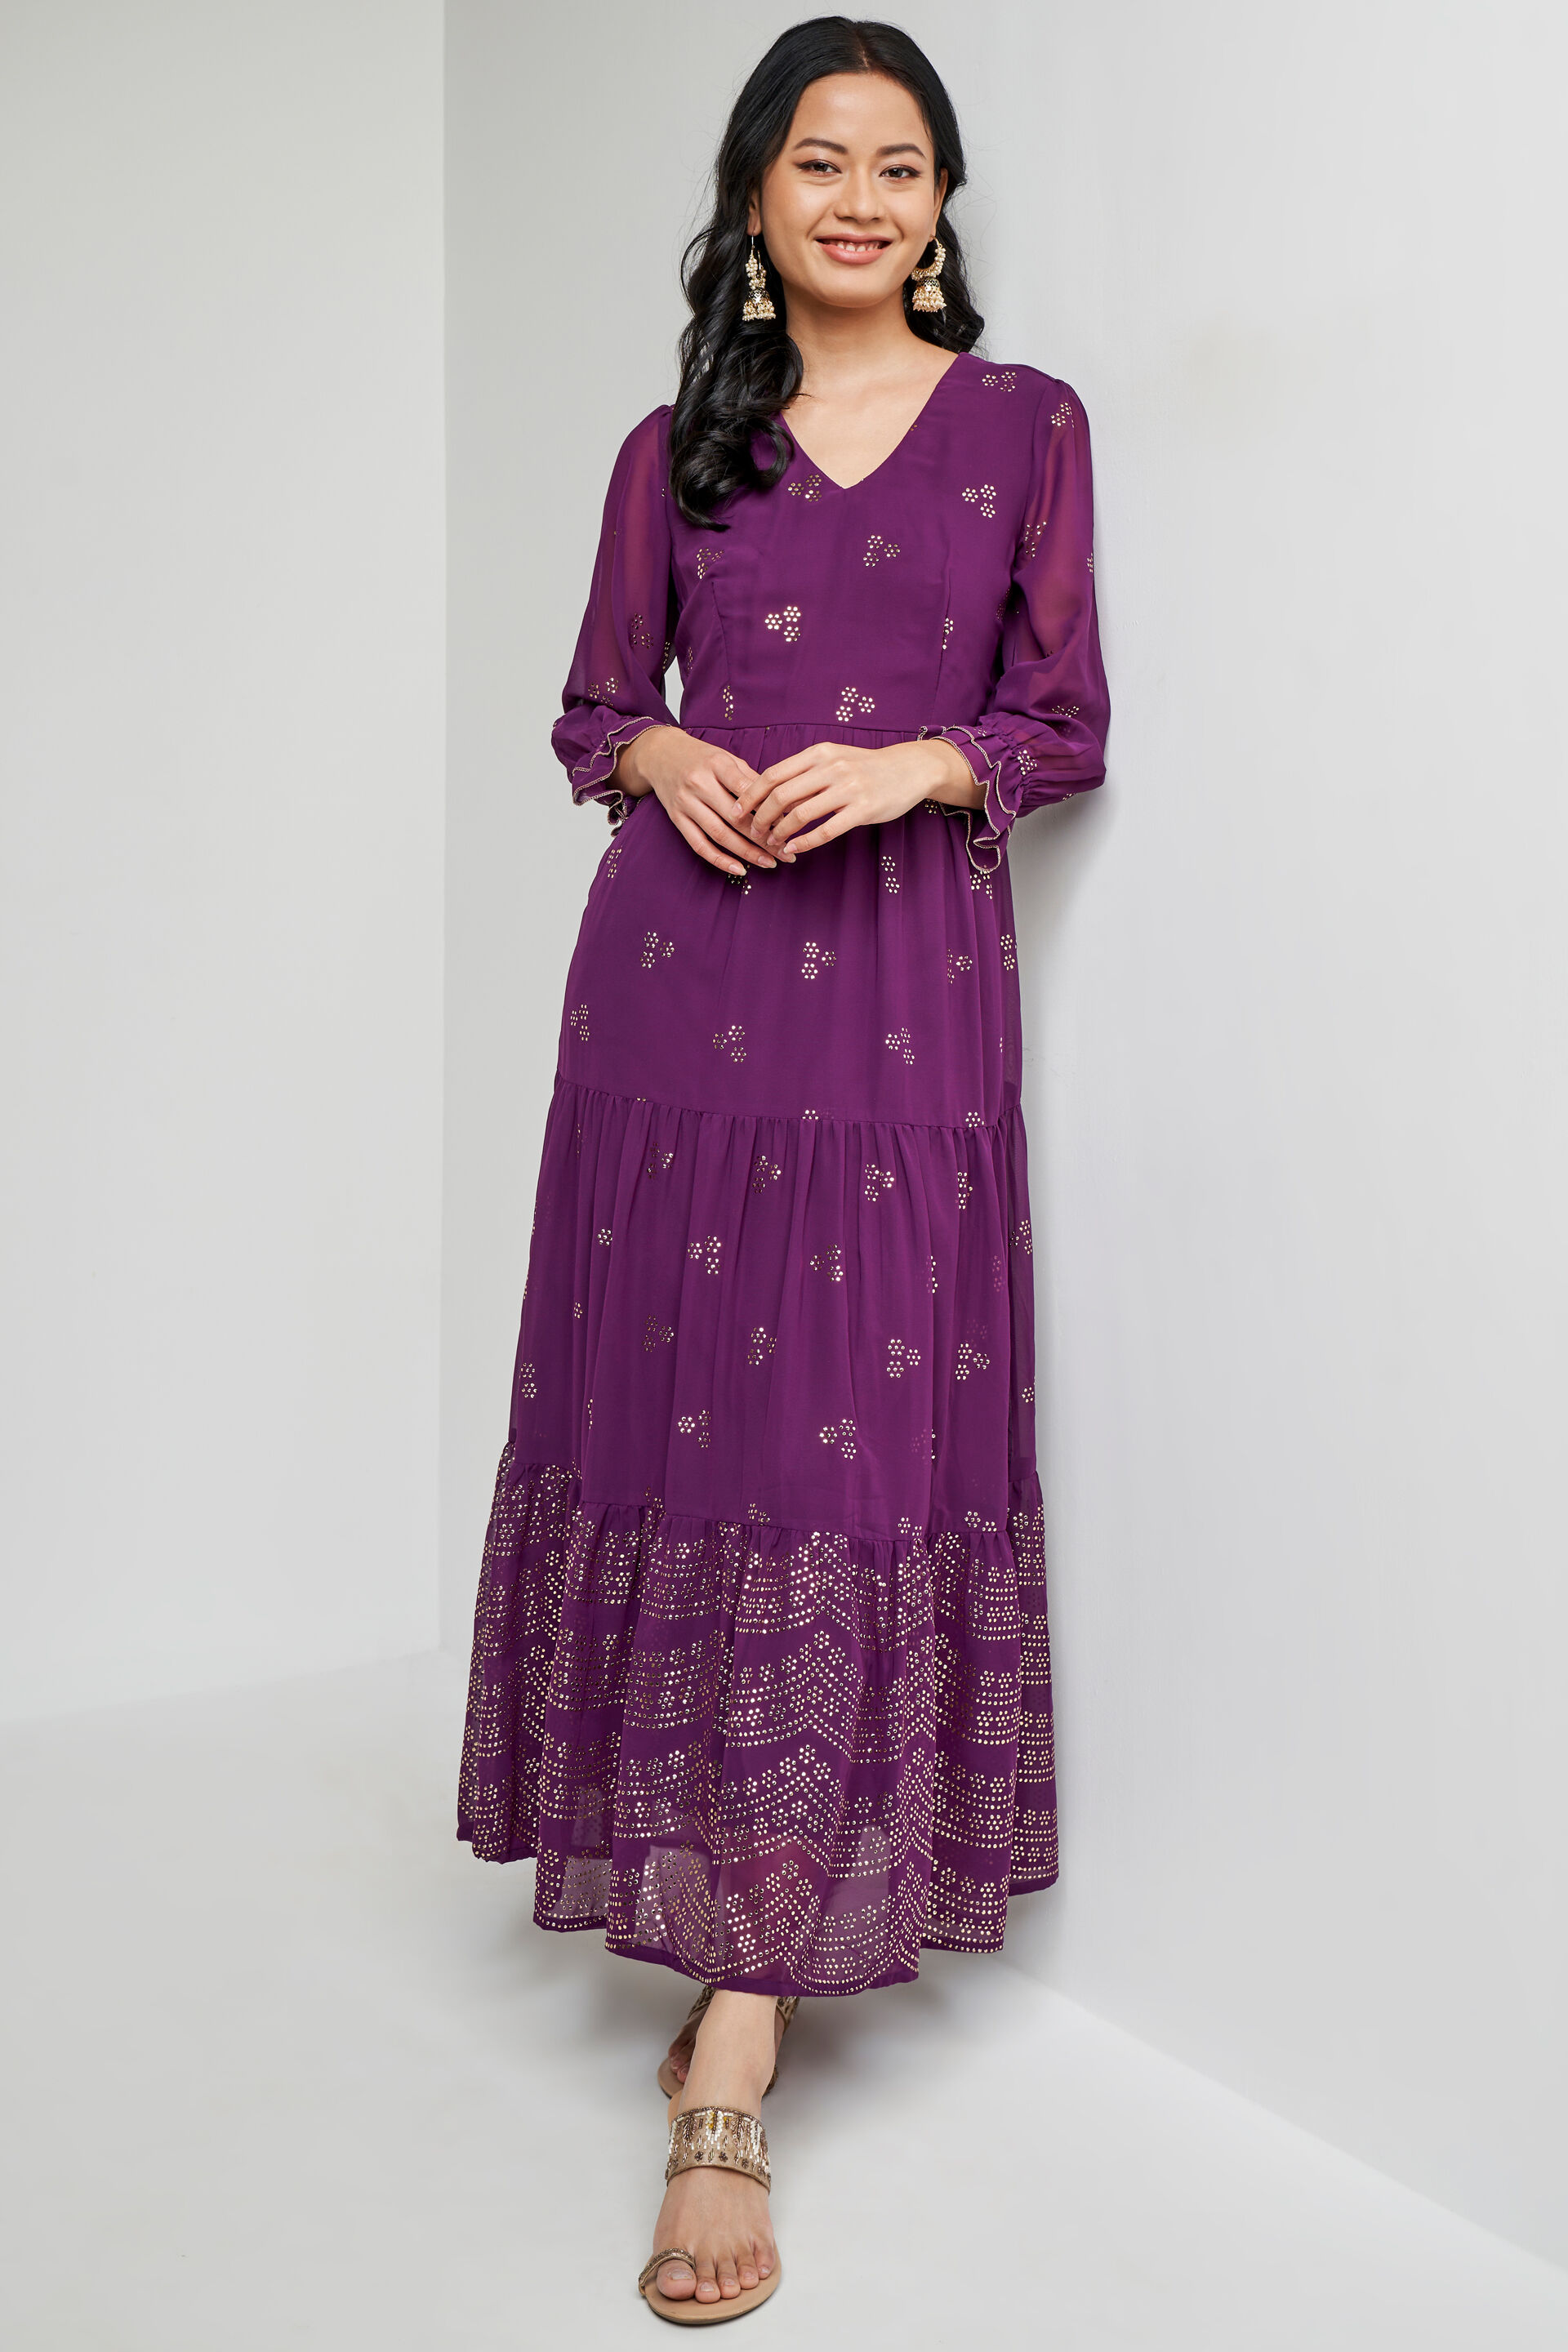 Womens Clothing Online Shopping - Buy Ethnic Wear Online India For Women  and Girls | Fabja.com